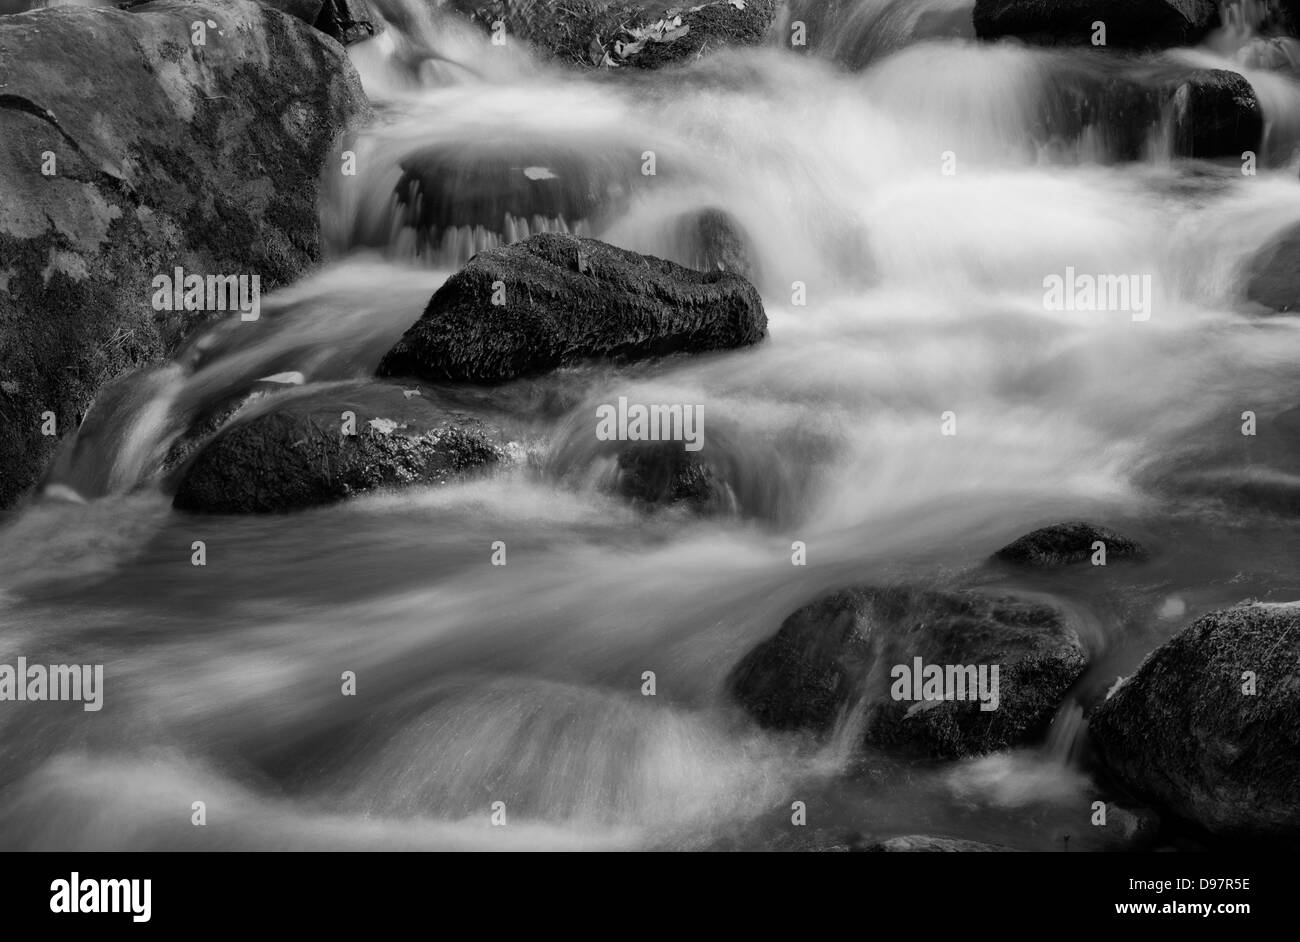 The rocks and water flow along Tremont Creek in the Great Smoky Mountains National Park, Tennessee Stock Photo